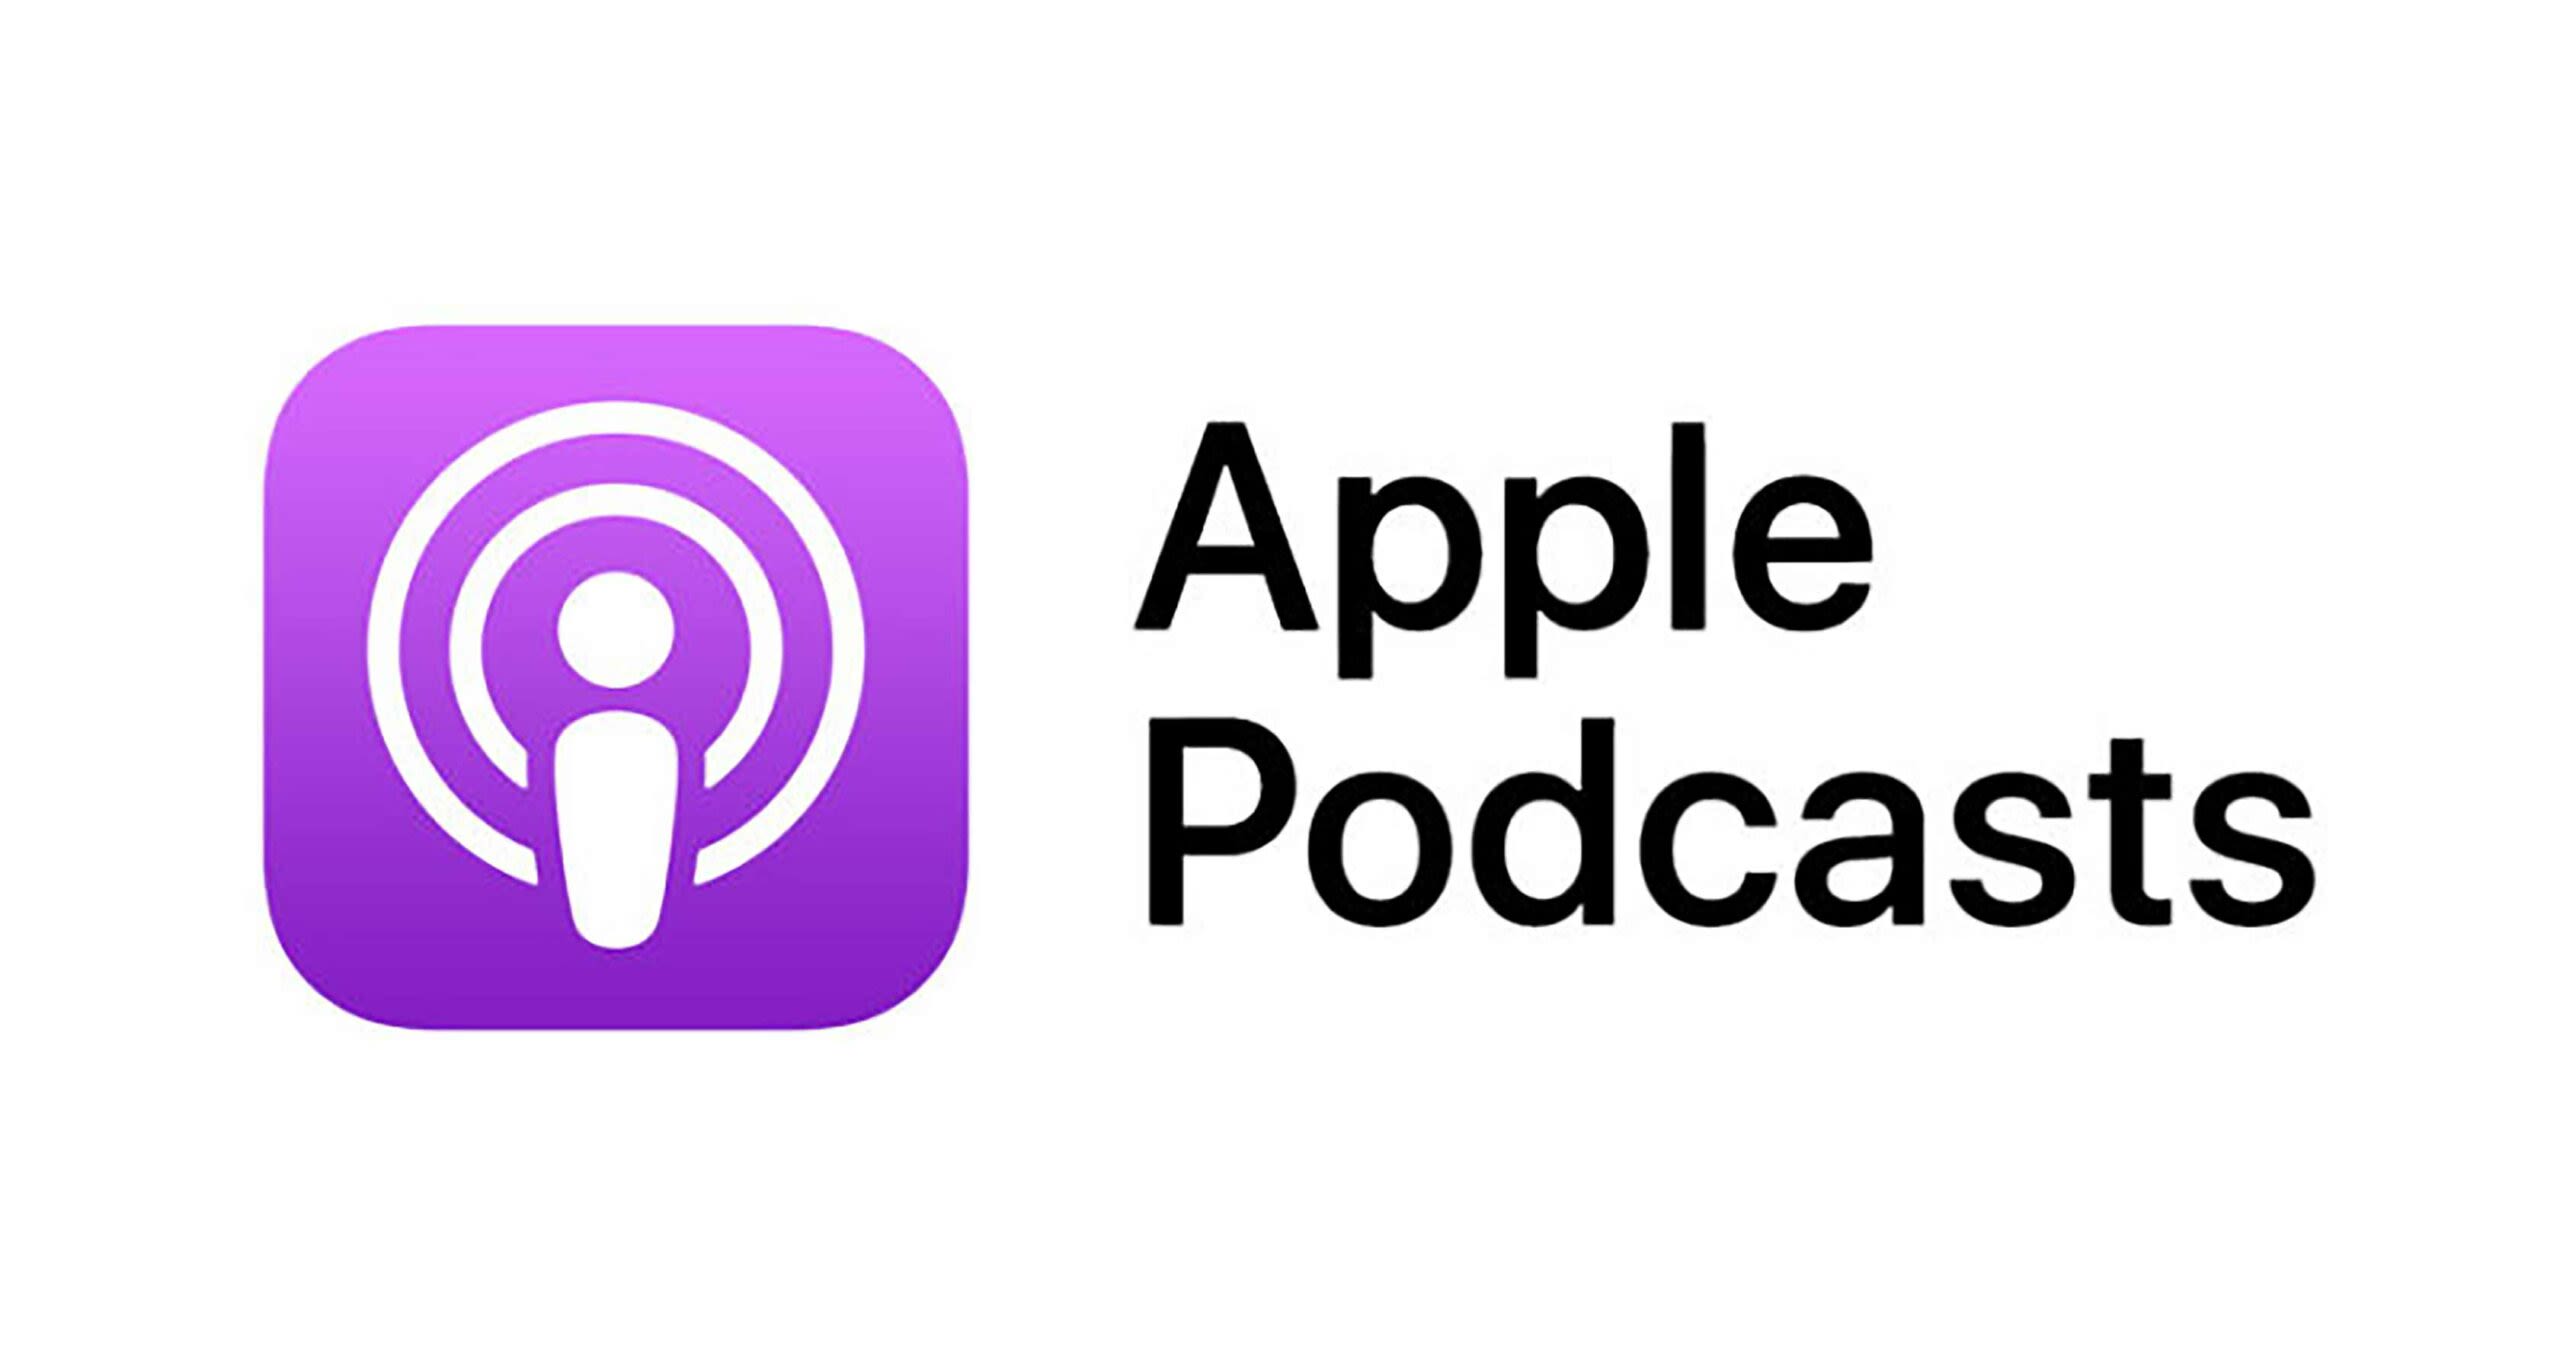 Houston We Have a Podcast on Apple Podcasts